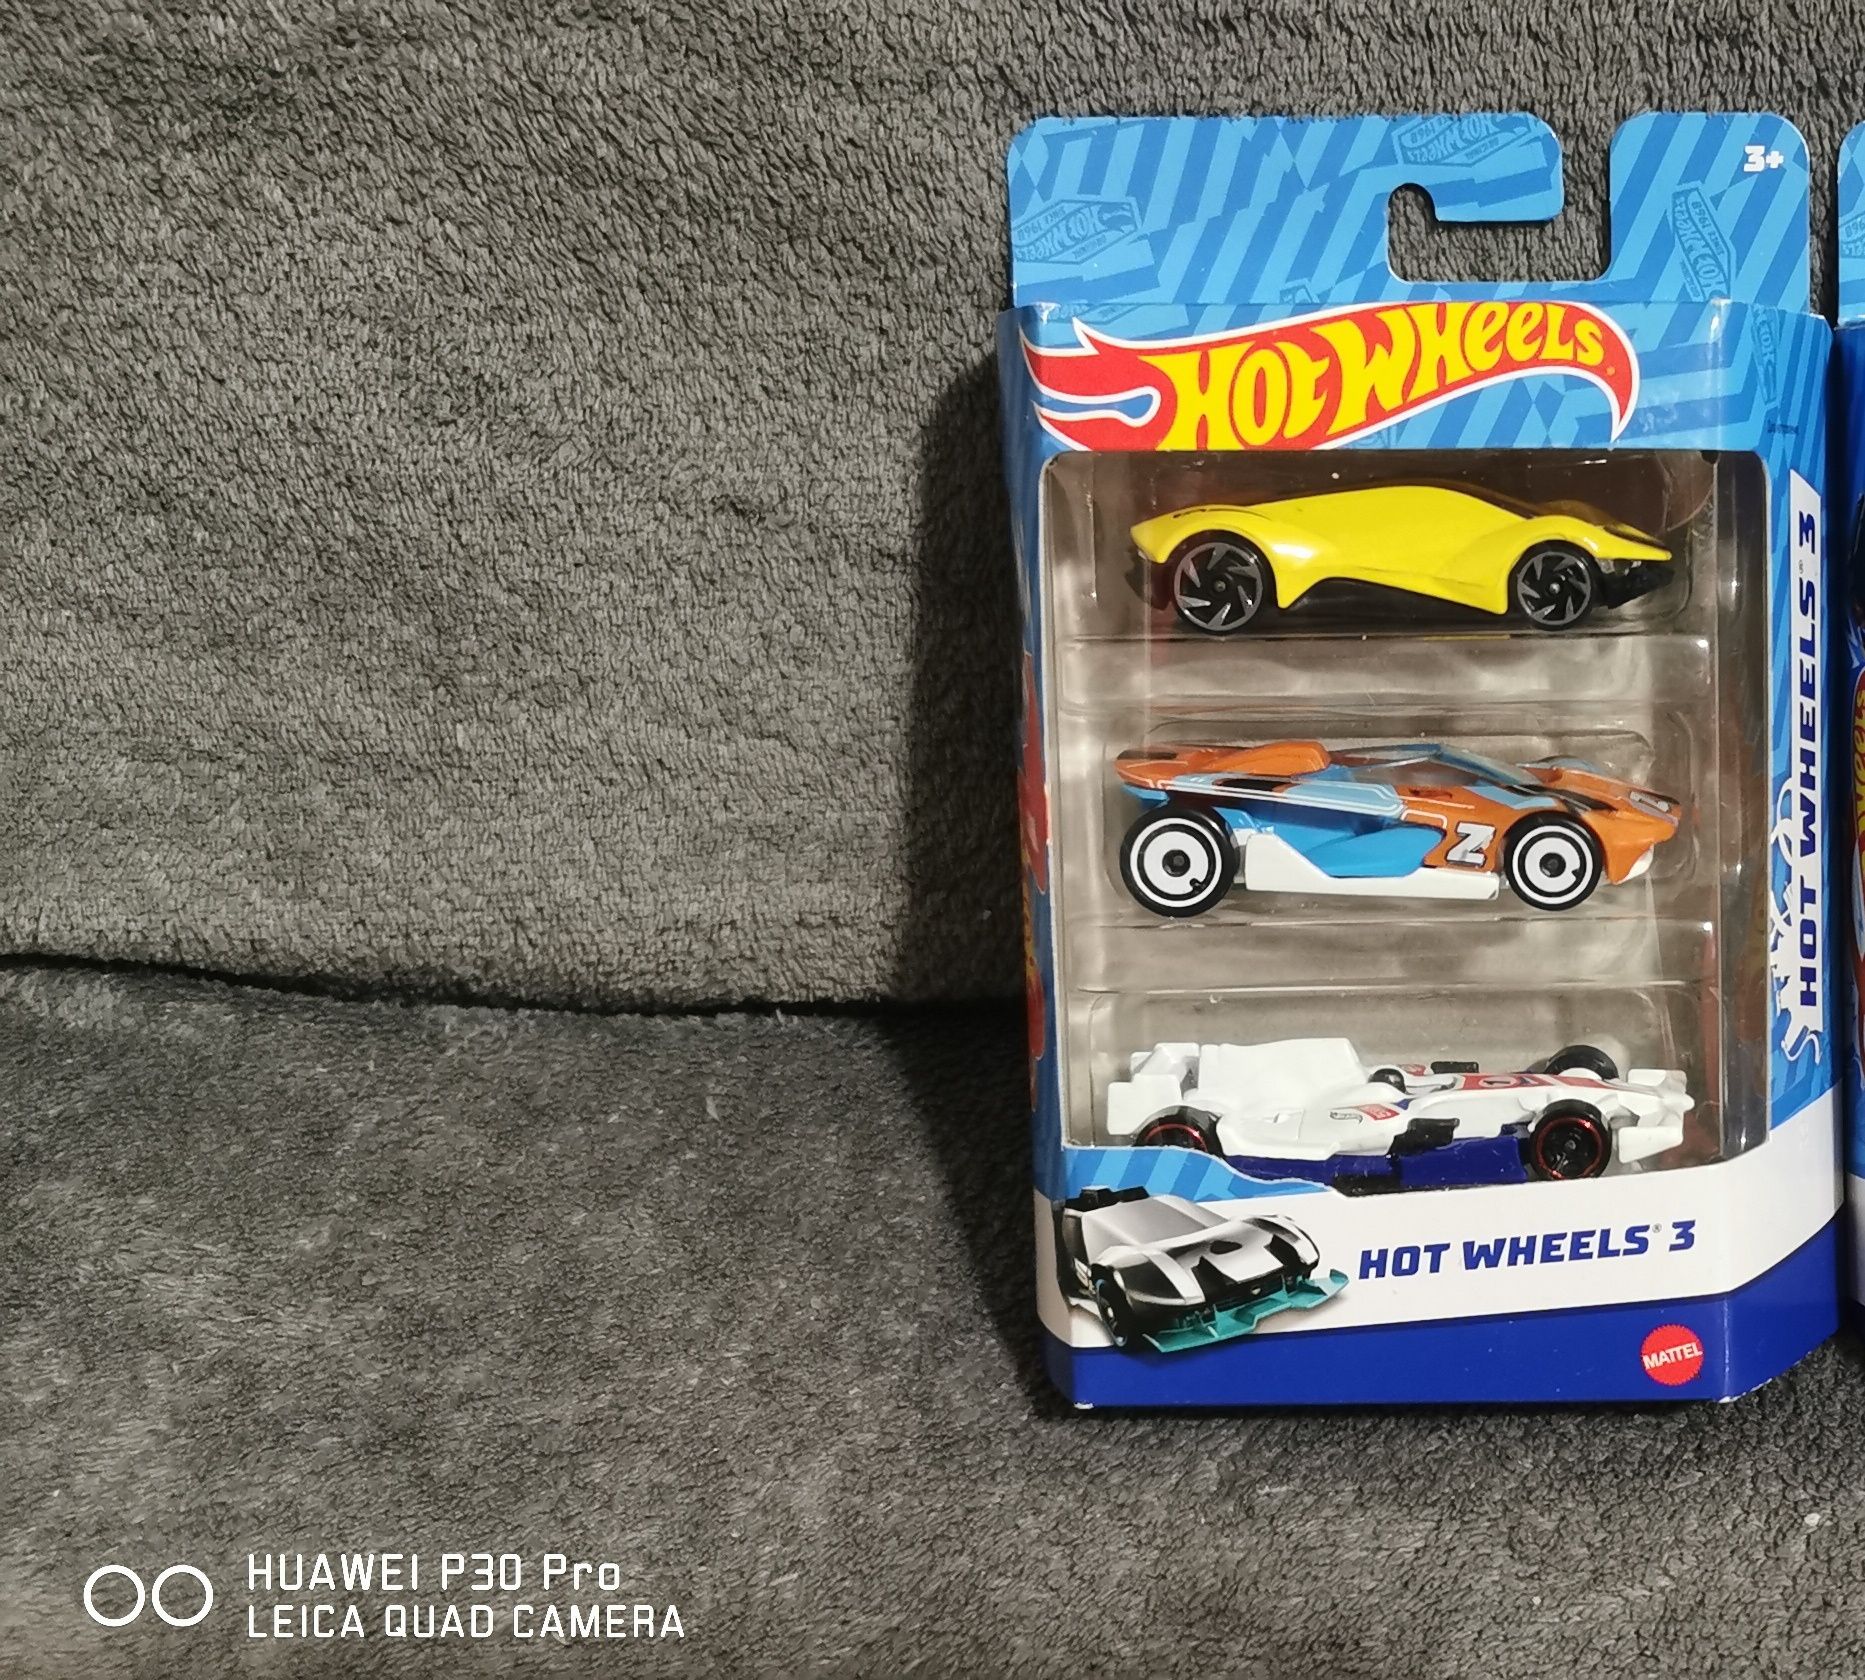 Hot wheels premium and many more